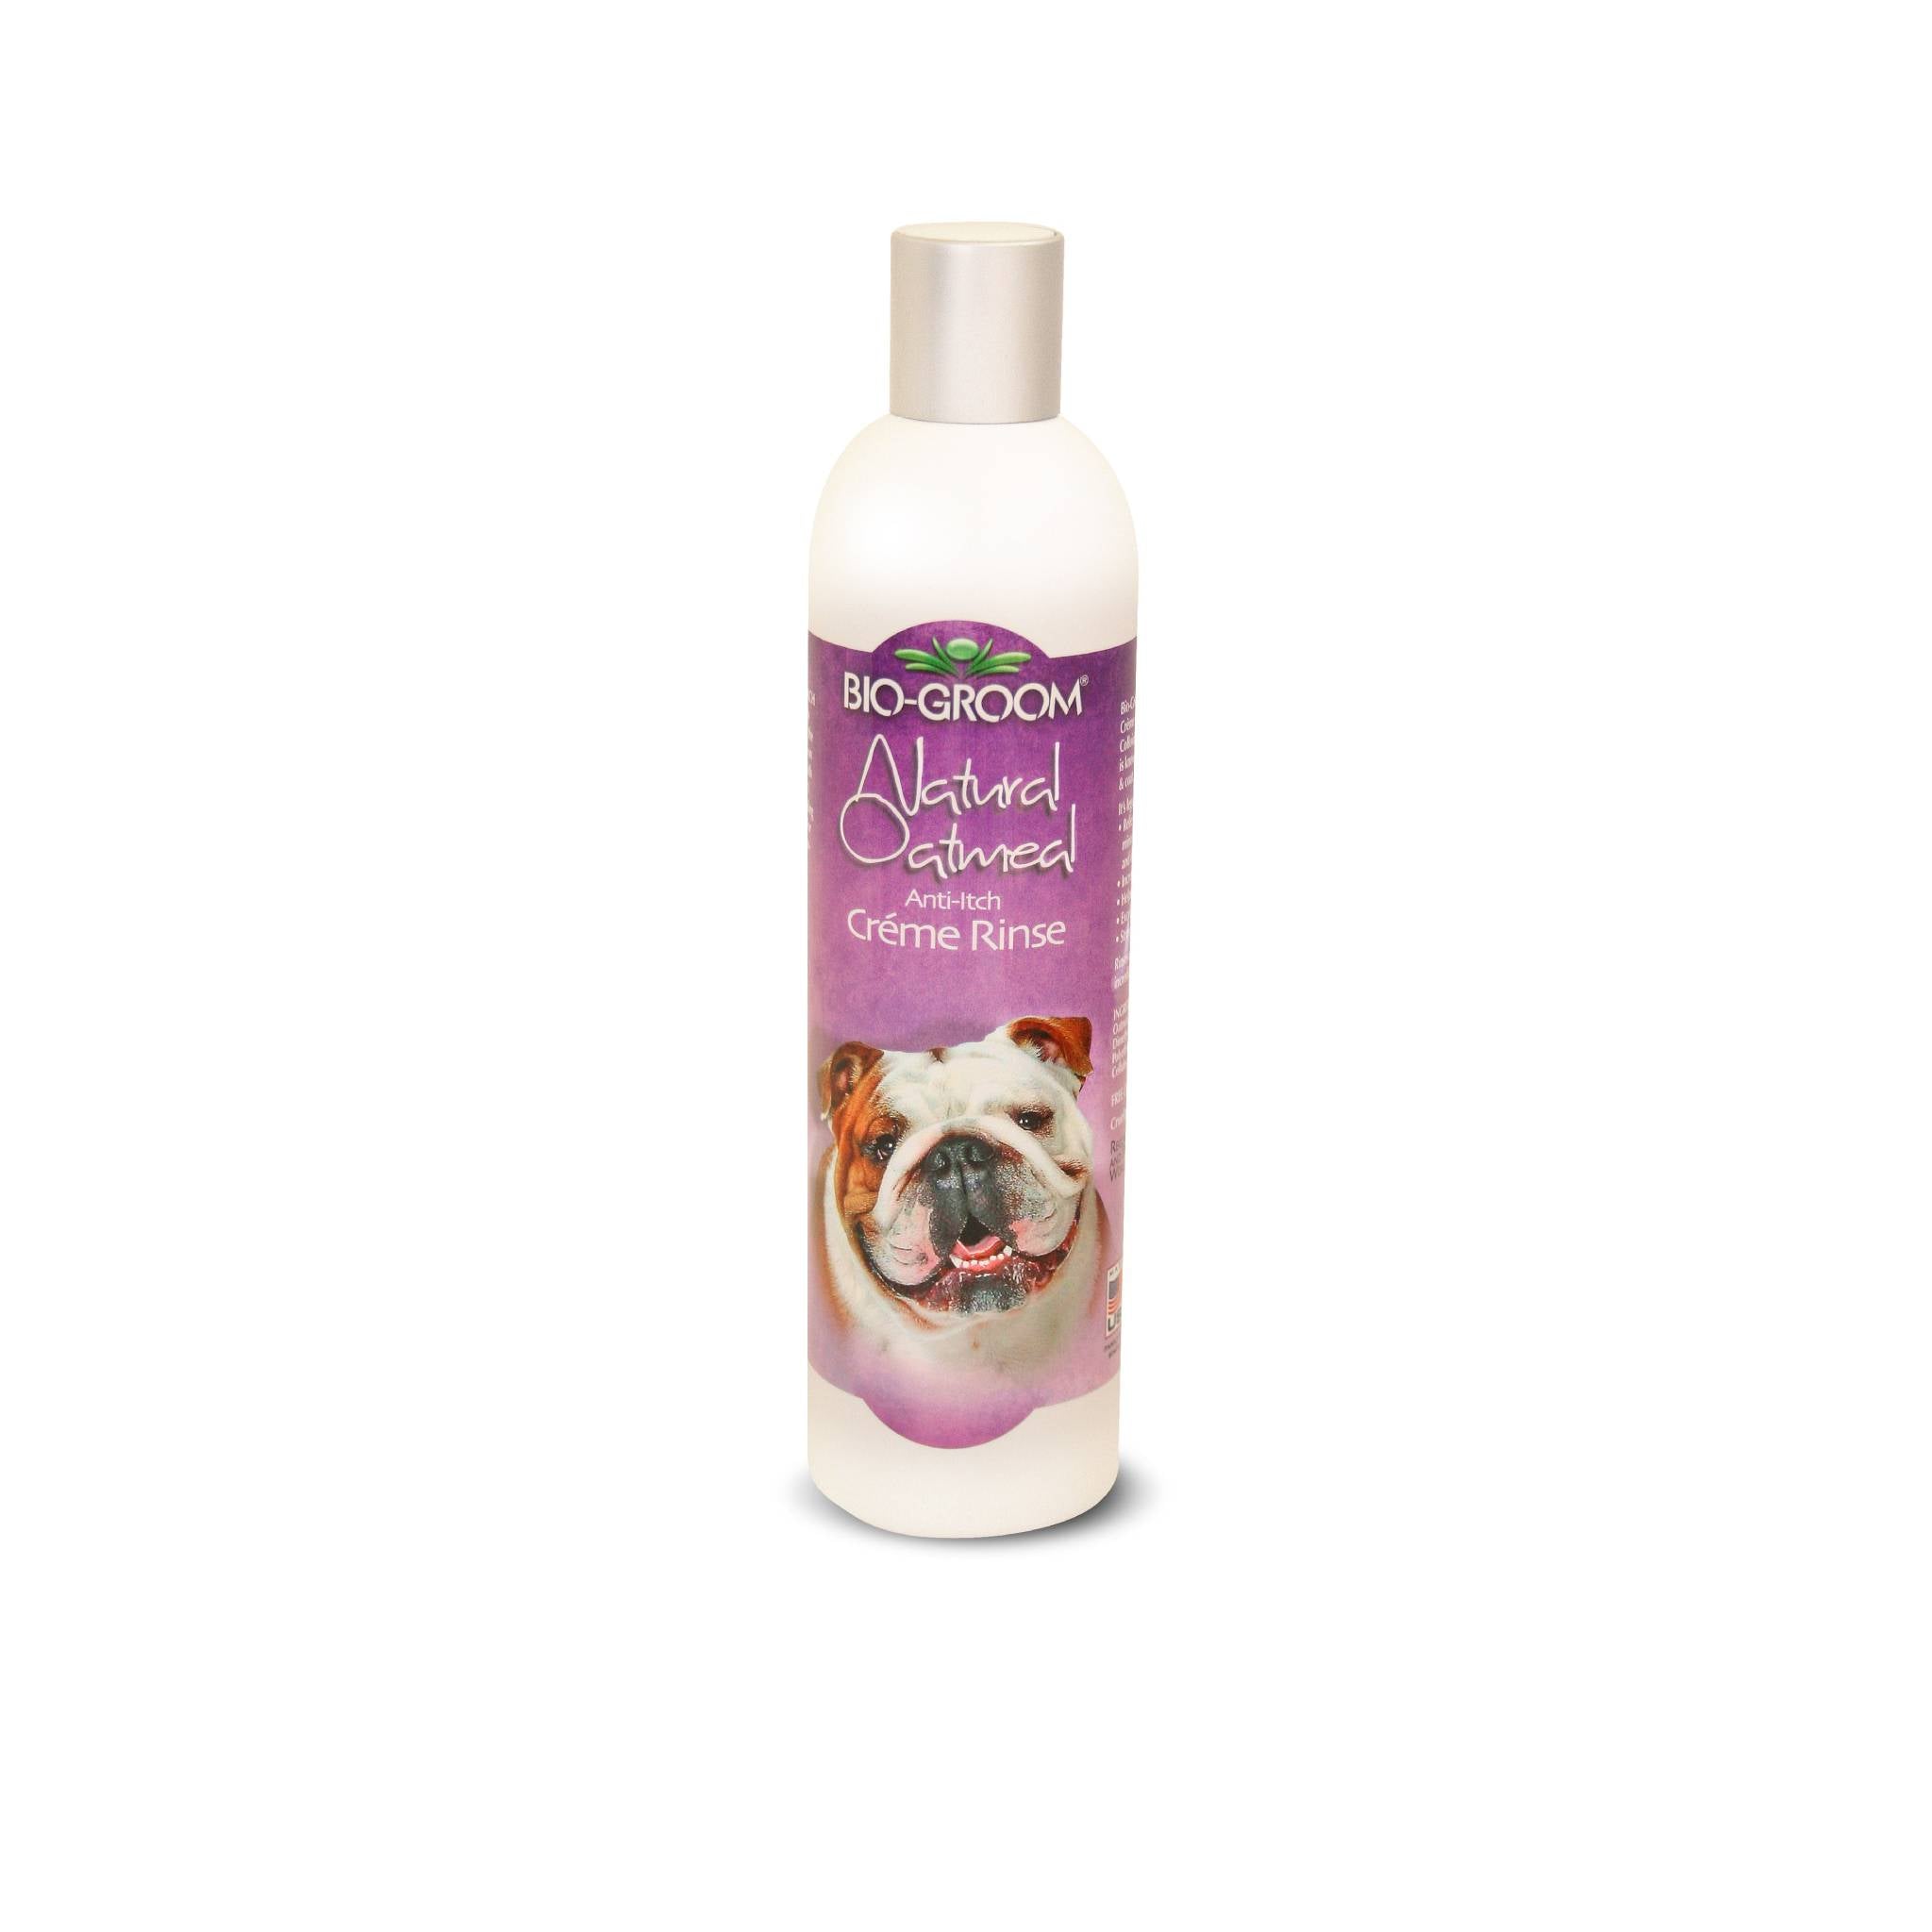 Bio-Groom Natural Oatmeal Crème Rinse Anti-Itch Dog Conditioner, 355 ml